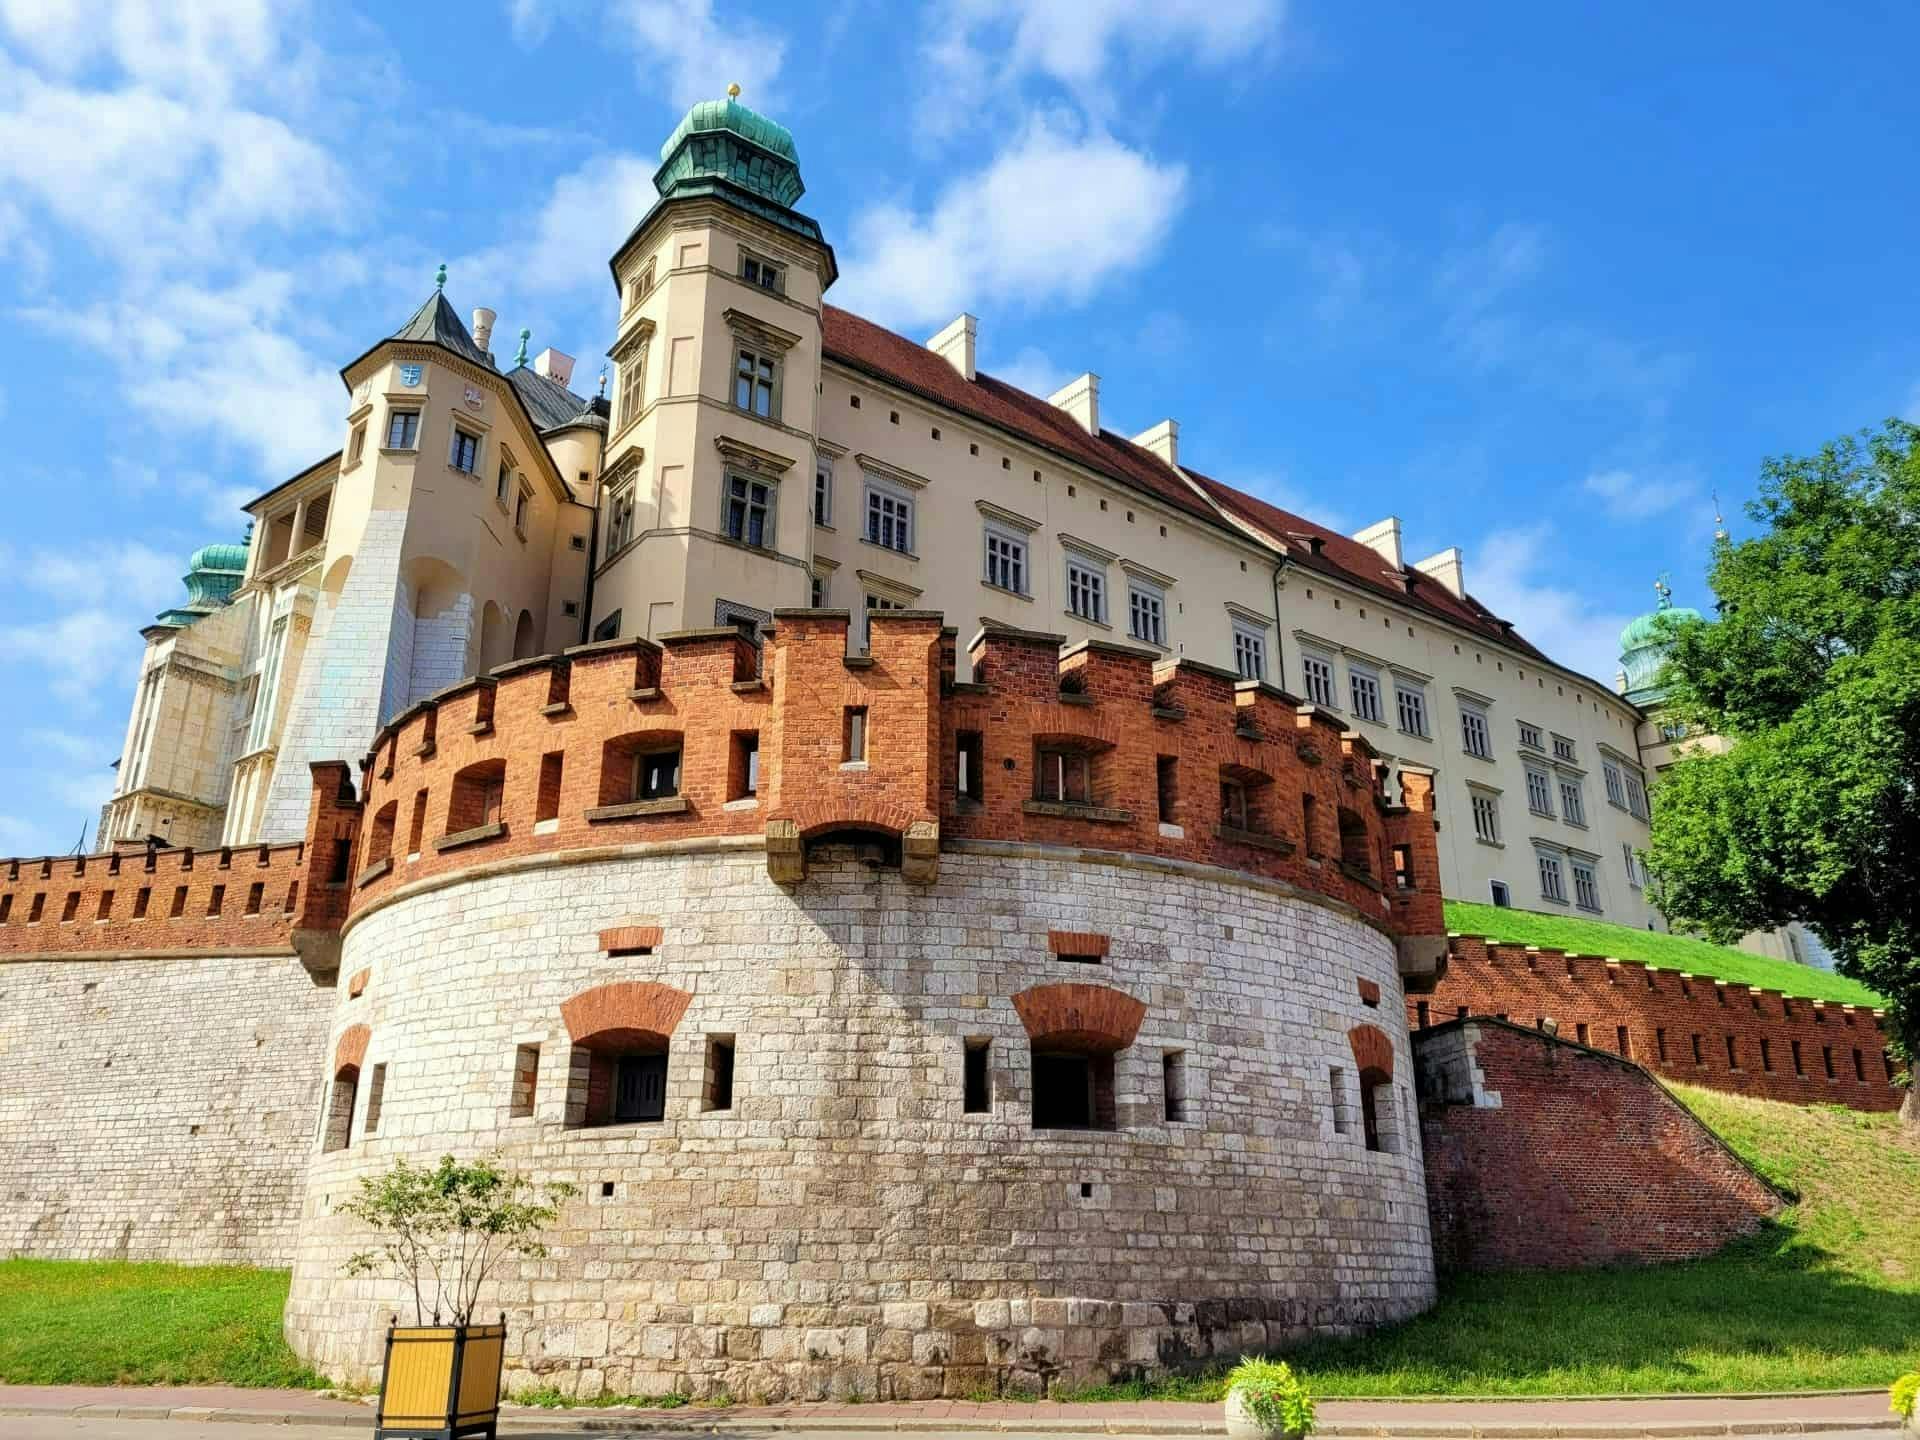 Spanish Guided Tour to Wawel Highlights